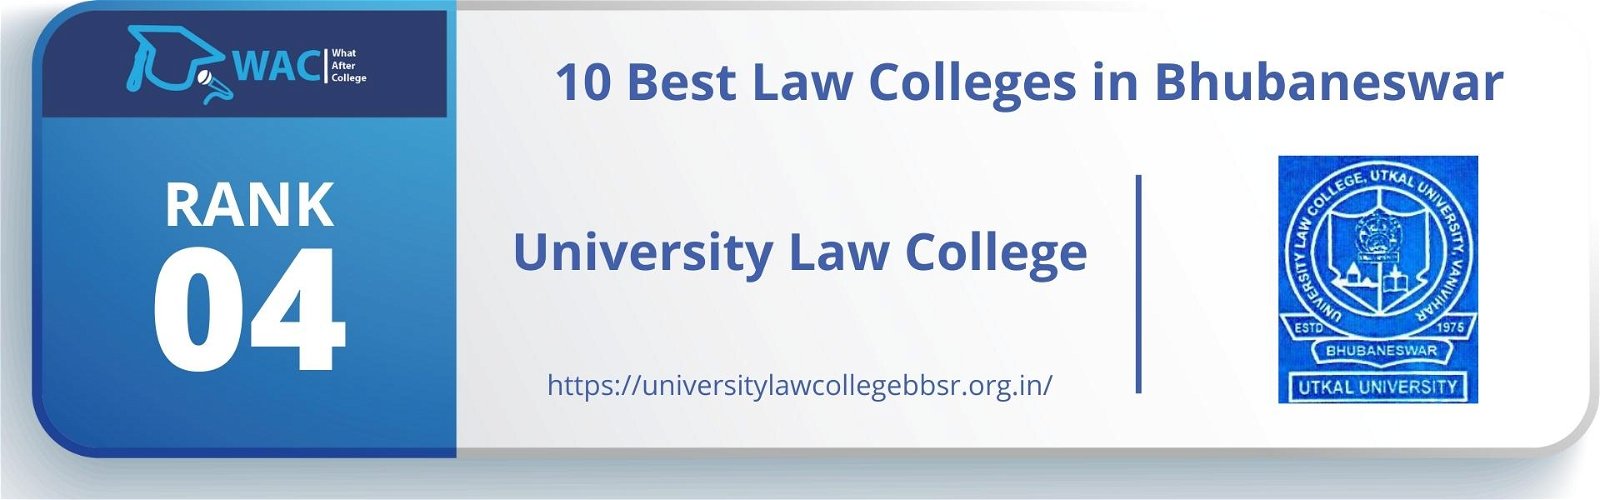 Law Colleges in Bhubaneswar